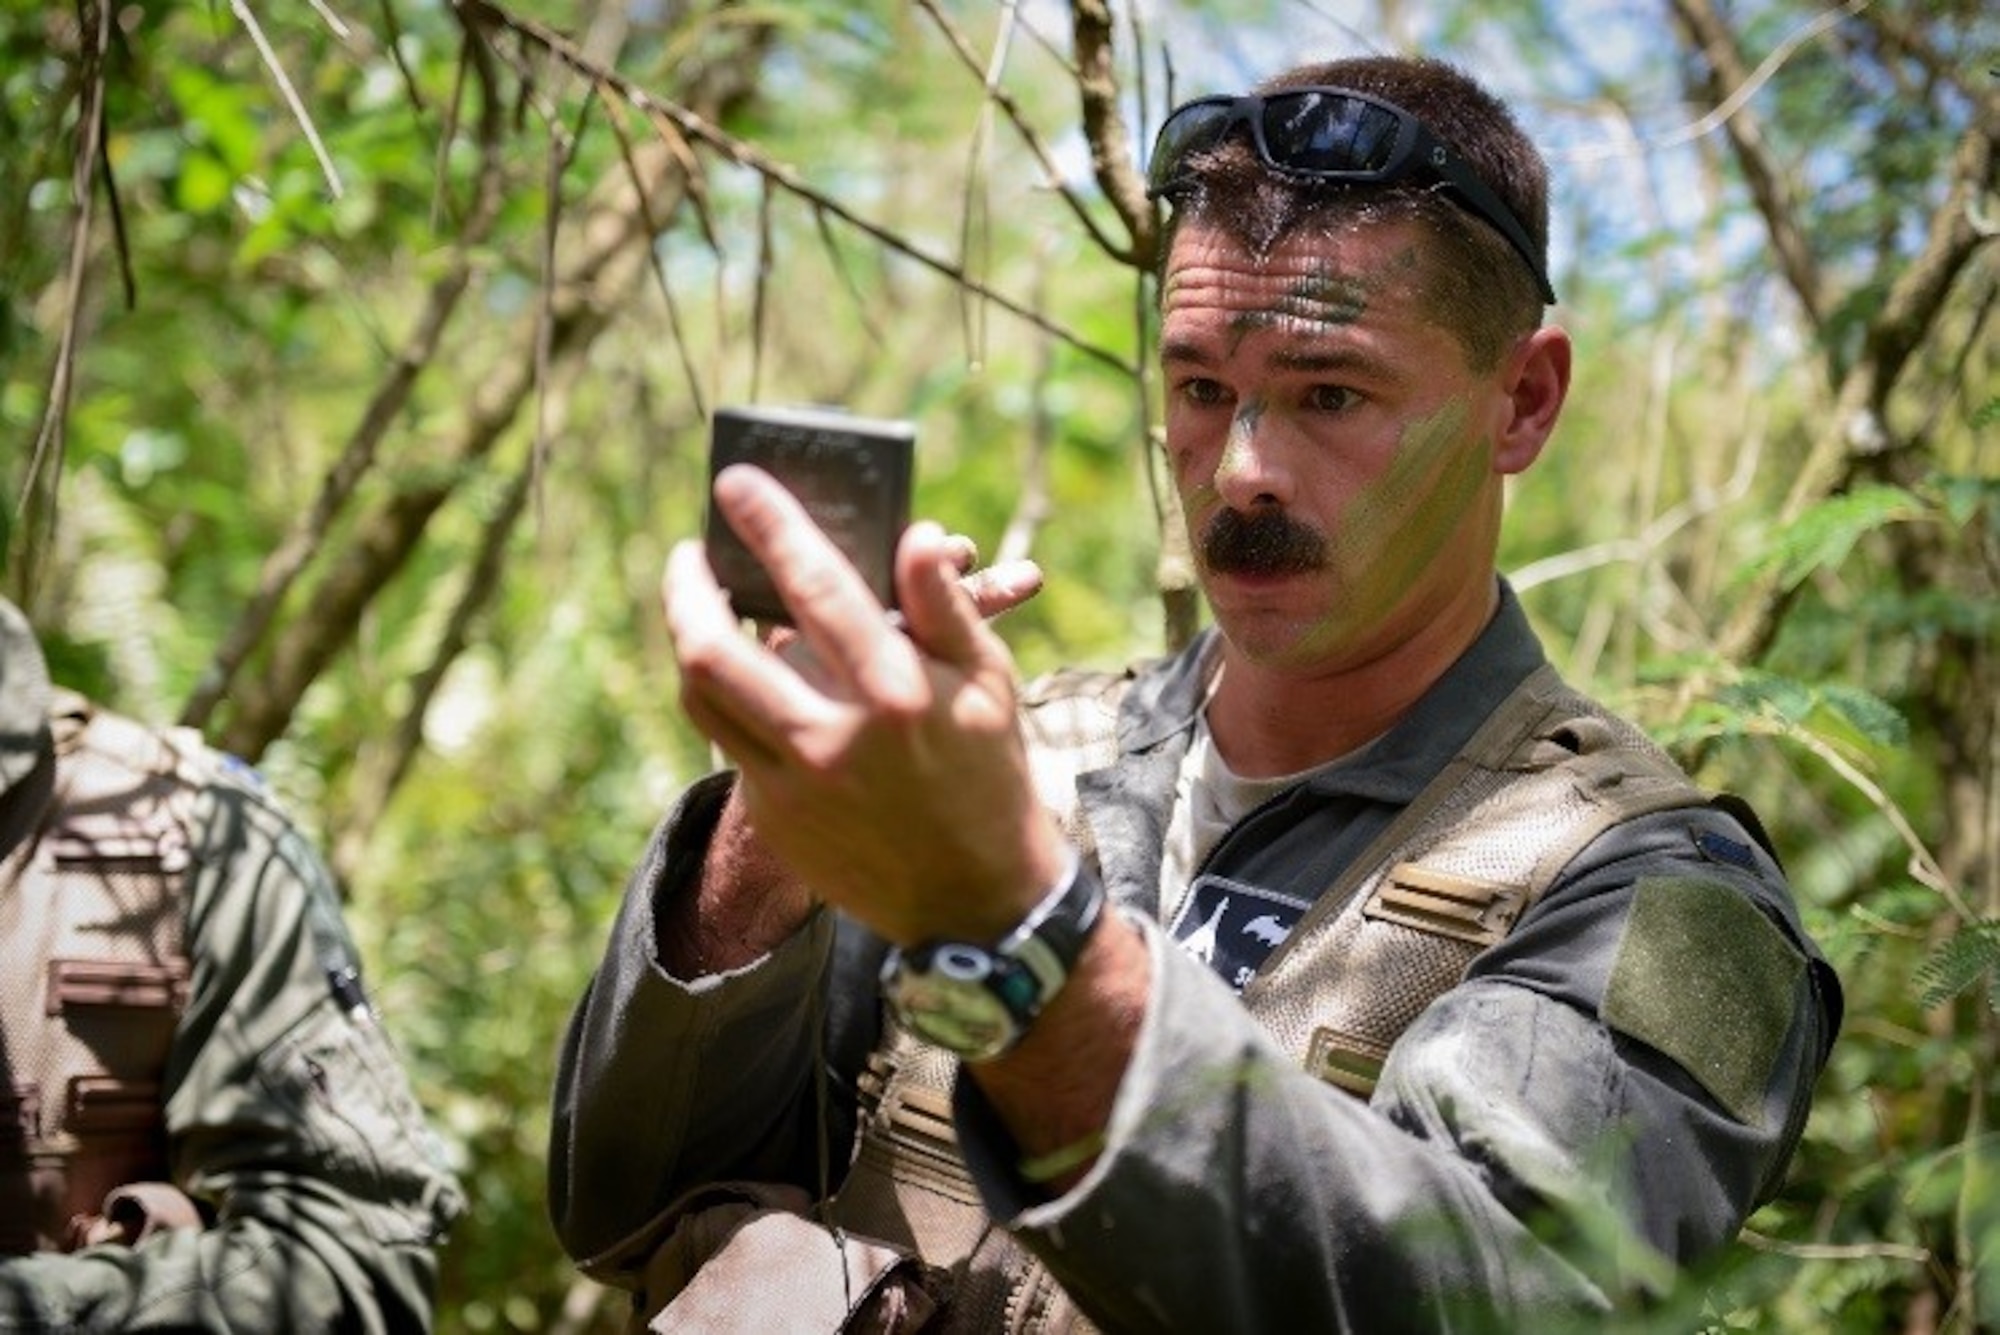 U.S. Air Force 1st Lt. Manuel Lamson, 9th Expeditionary Bomb Squadron weapon systems officer, applies camouflage face paint during a combat search and rescue training exercise June 5, 2017, at Andersen South, Guam. During the exercise, Lamson acted as a downed aircrew member, along with three other Airmen, and was tested on his ability to survive and evade in a jungle environment. (U.S. Air Force photo by Staff Sgt. Joshua Smoot)
